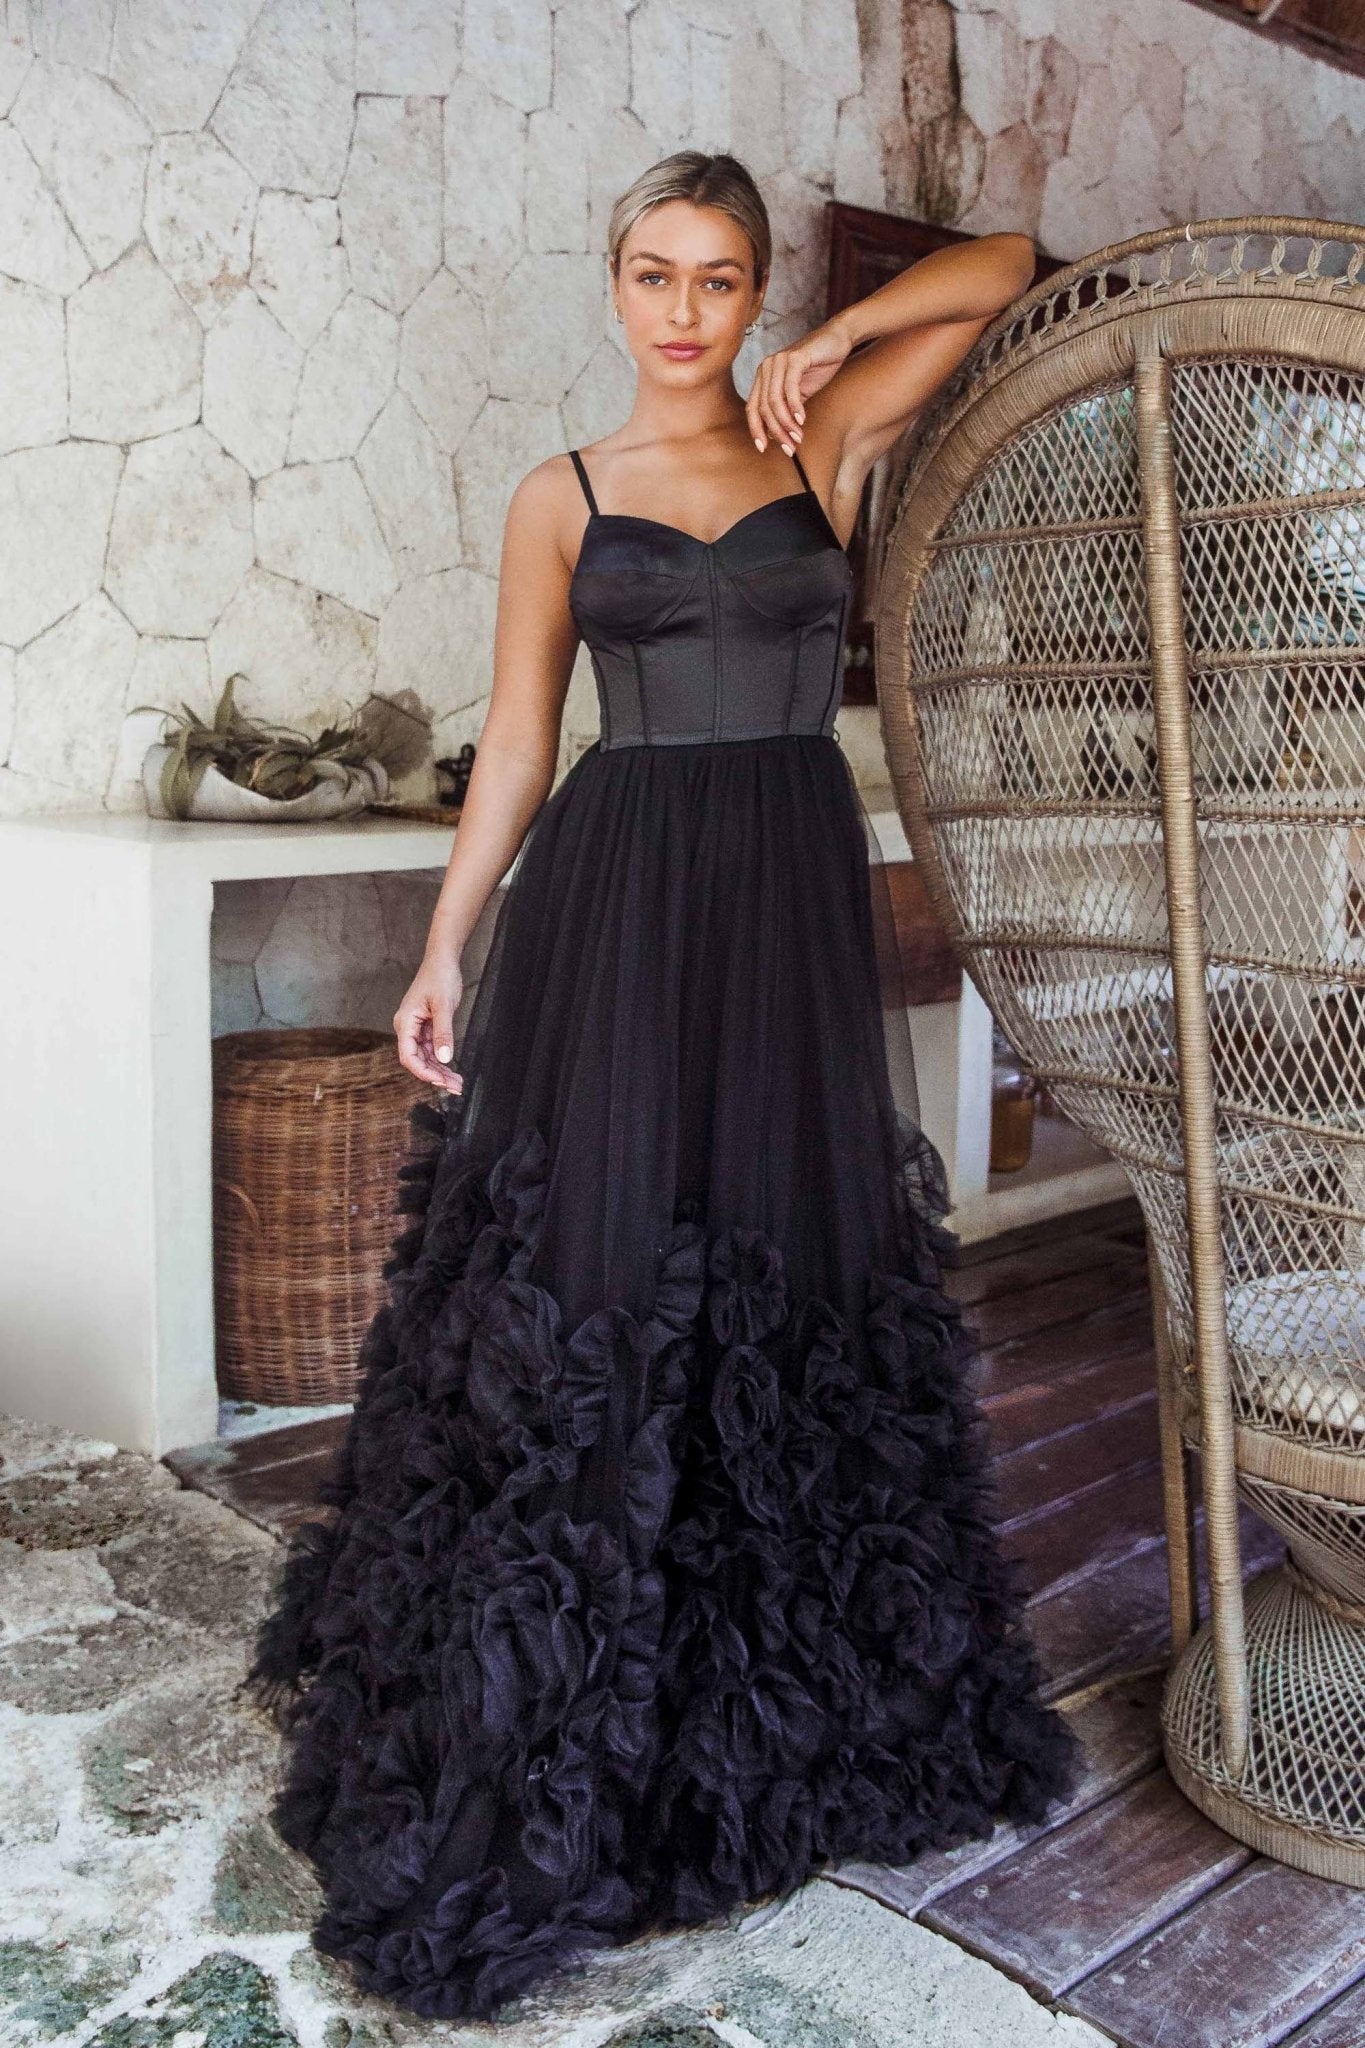 Lace Applique Tulle Prom Dress Long Sleeve Wedding Dress V Neck A Line  Formal Dresses Ball Evening Gowns Size 0, Black at Amazon Women's Clothing  store